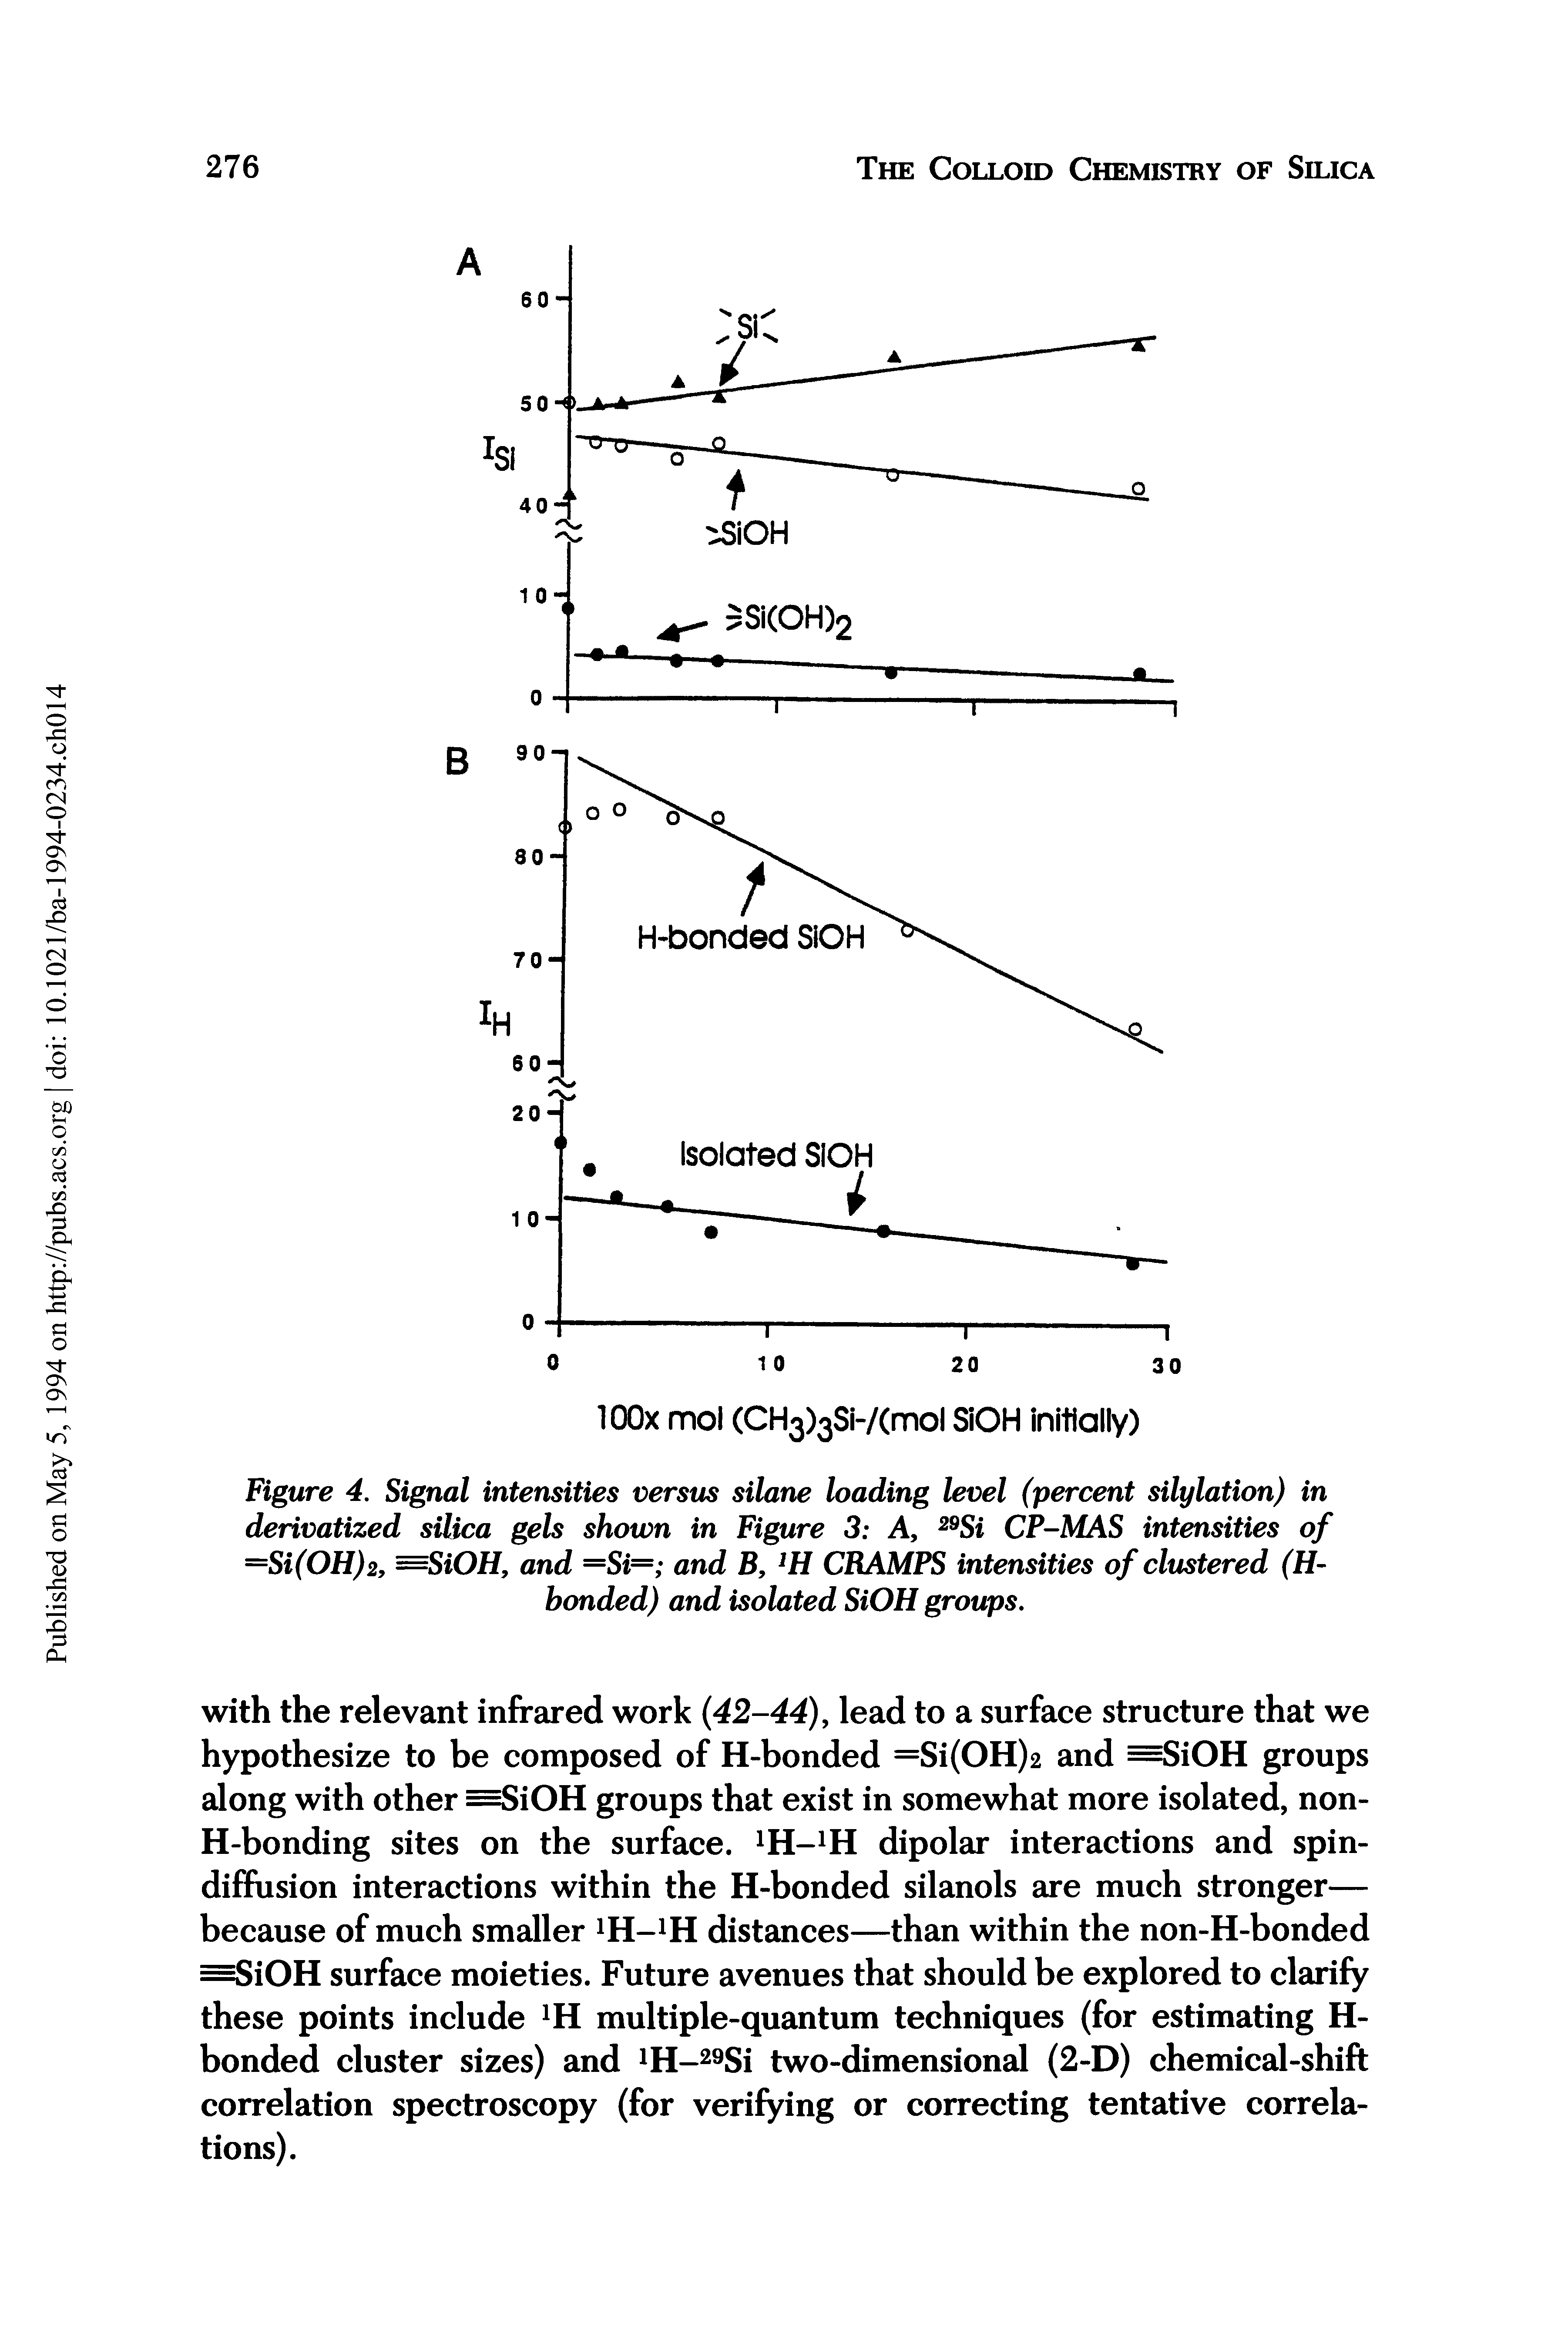 Figure 4. Signal intensities versus silane loading level (percent silylation) in derivatized silica gels shown in Figure 3 A, 29Si CP-MAS intensities of =Si(OH)2, =SiOH, and =Si= and B, 2H CRAMPS intensities of clustered (H-bonded) and isolated SiOH groups.